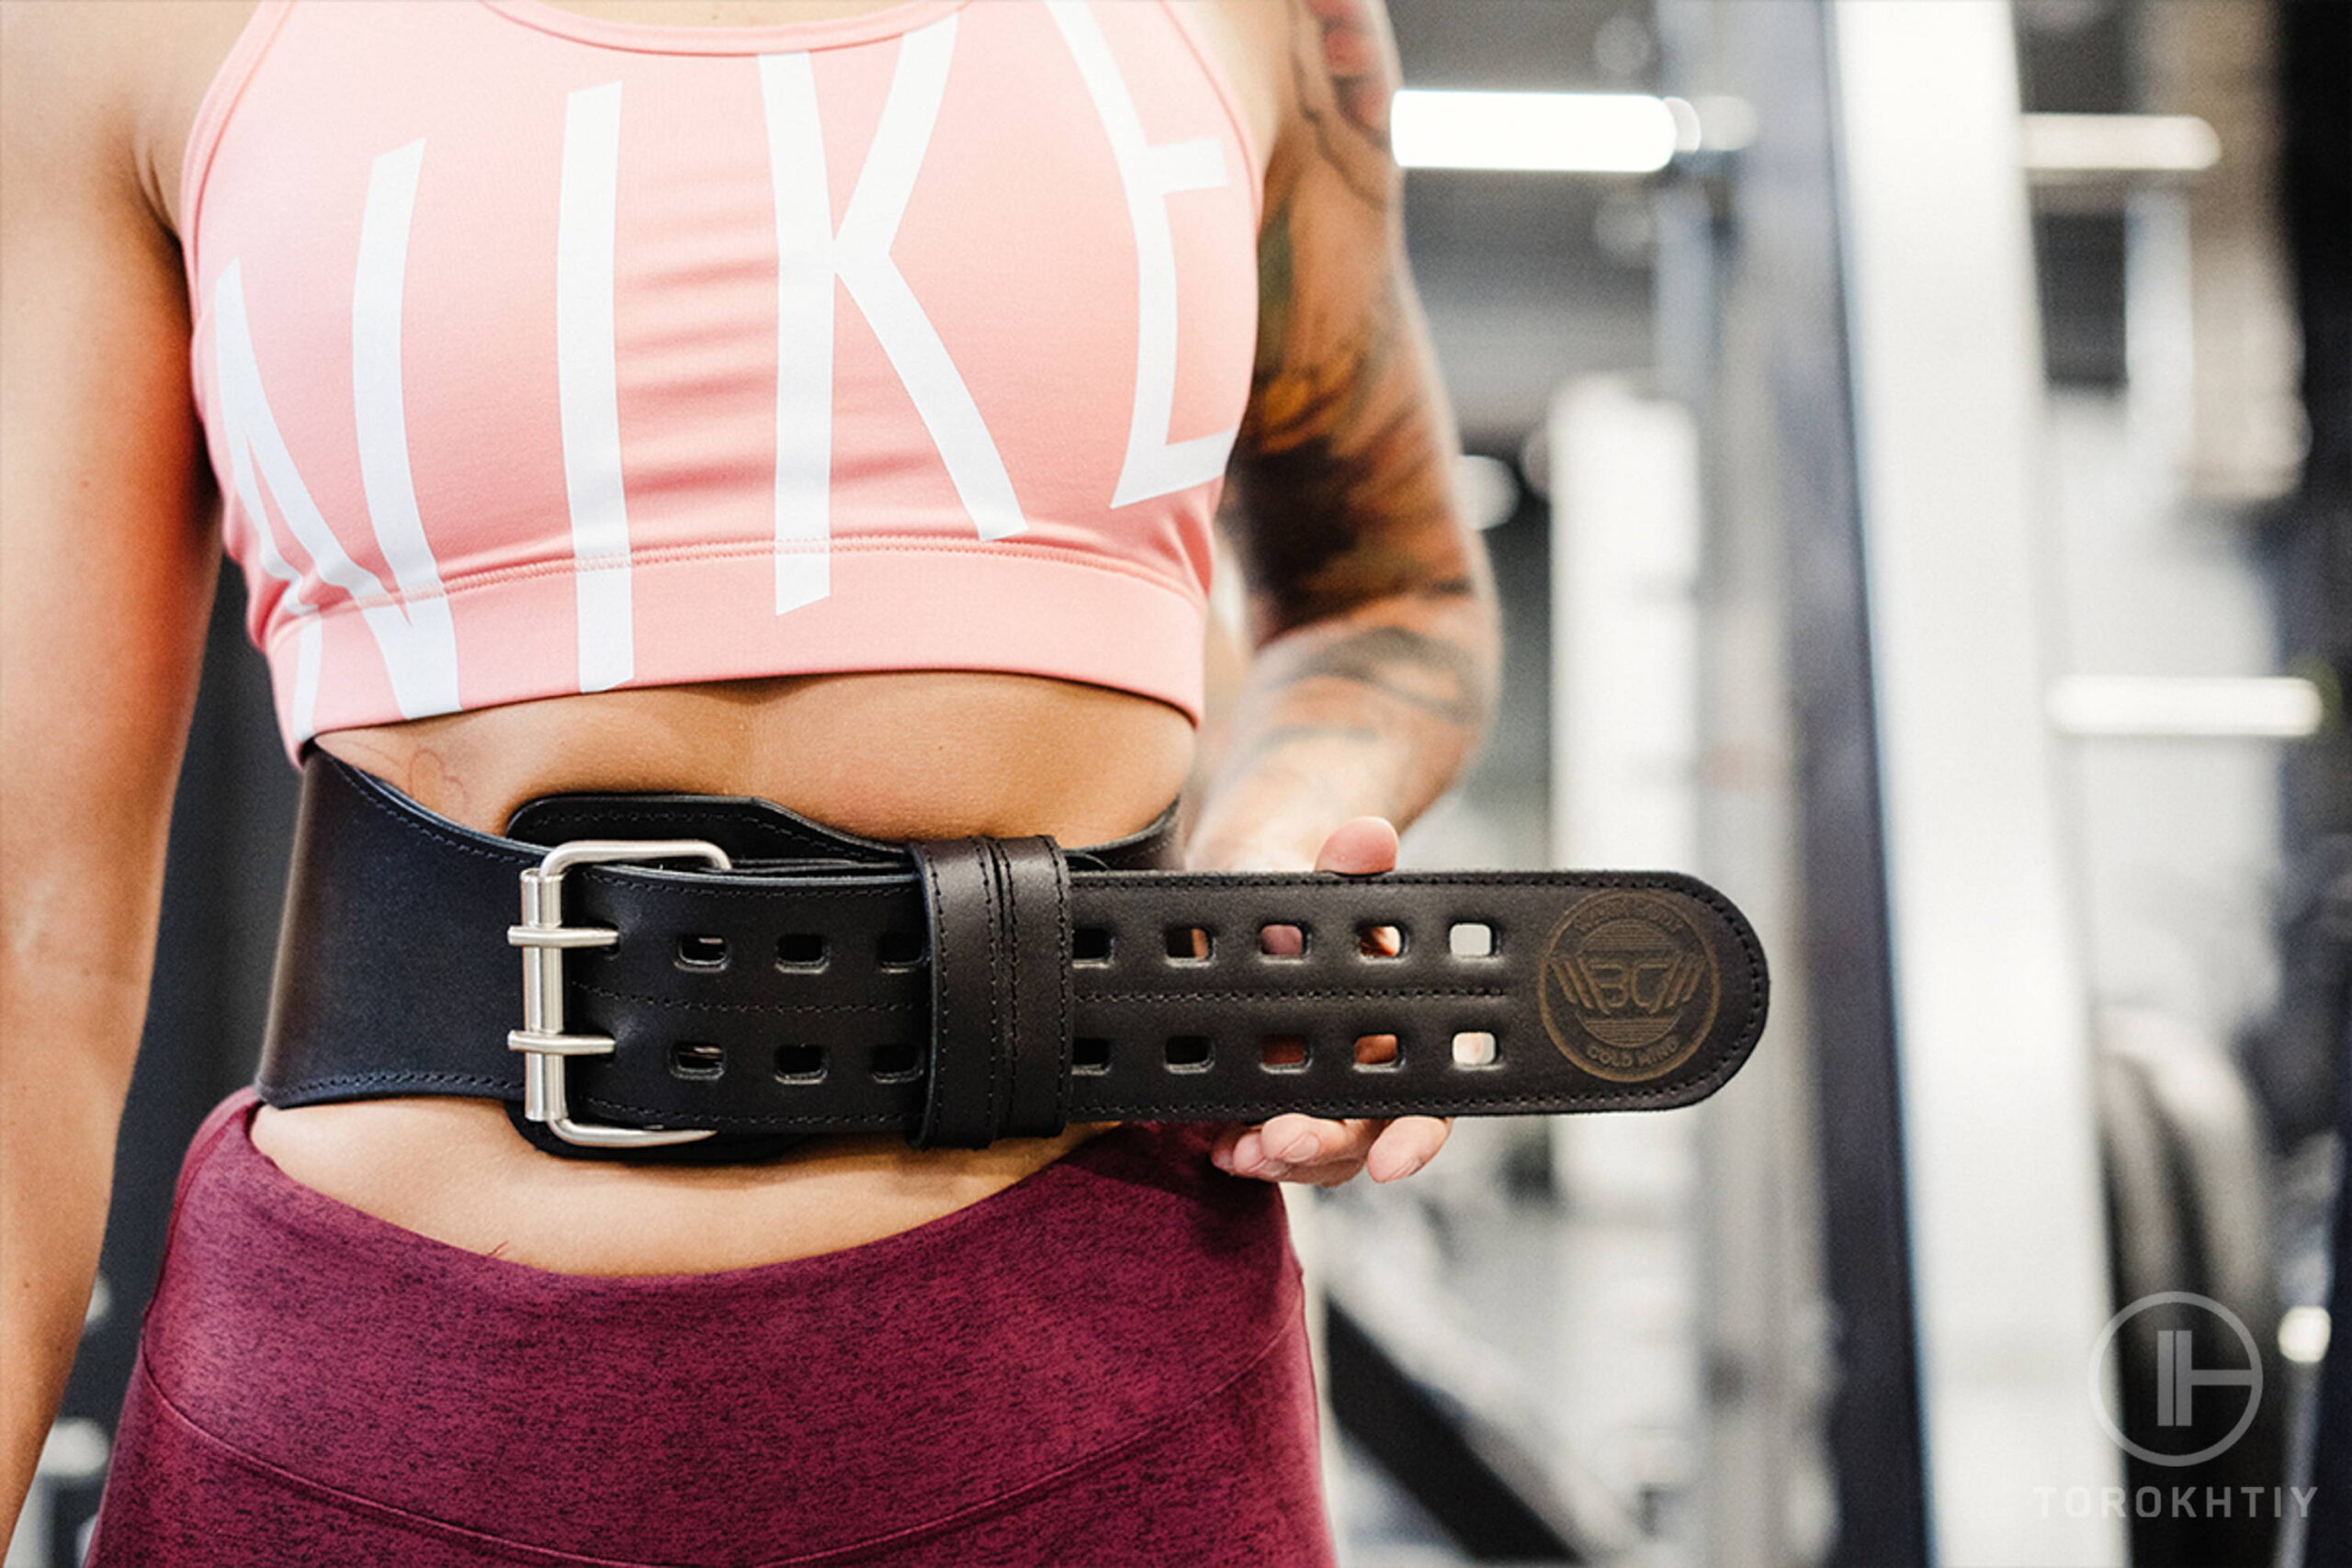 Weightlifting Belt - Be Smart And Wear One Too!